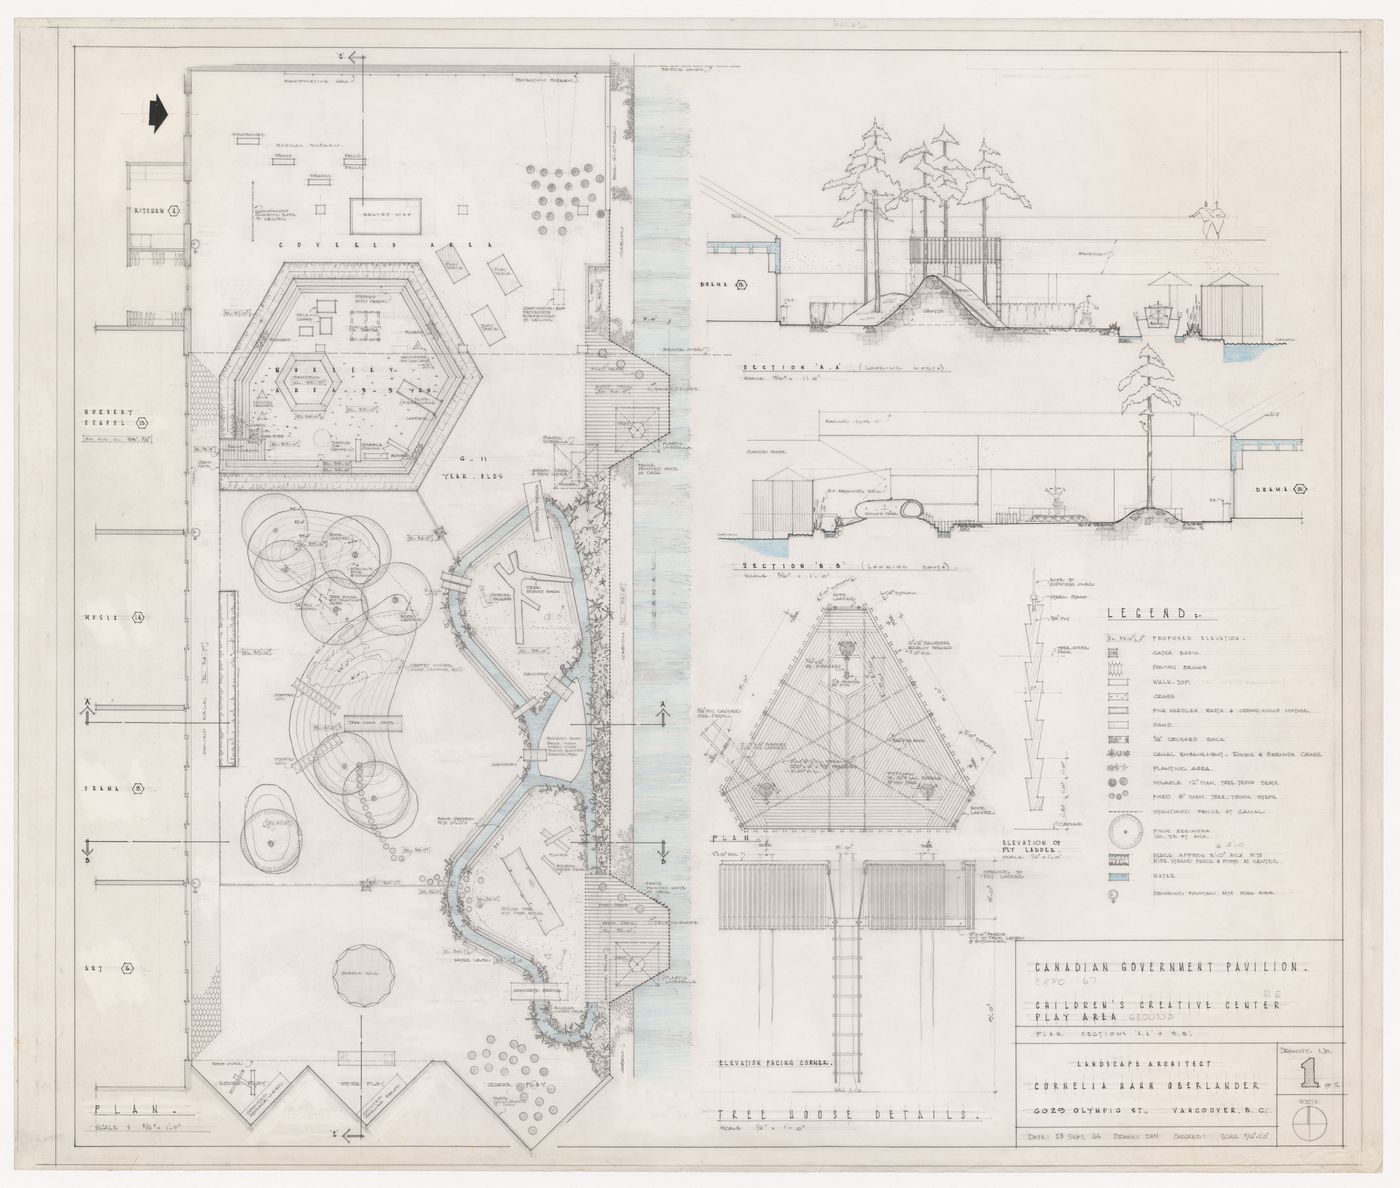 Plan, sections, elevations, and details for Children's Creative Centre Playground, Canadian Federal Pavilion, Expo '67, Montréal, Québec